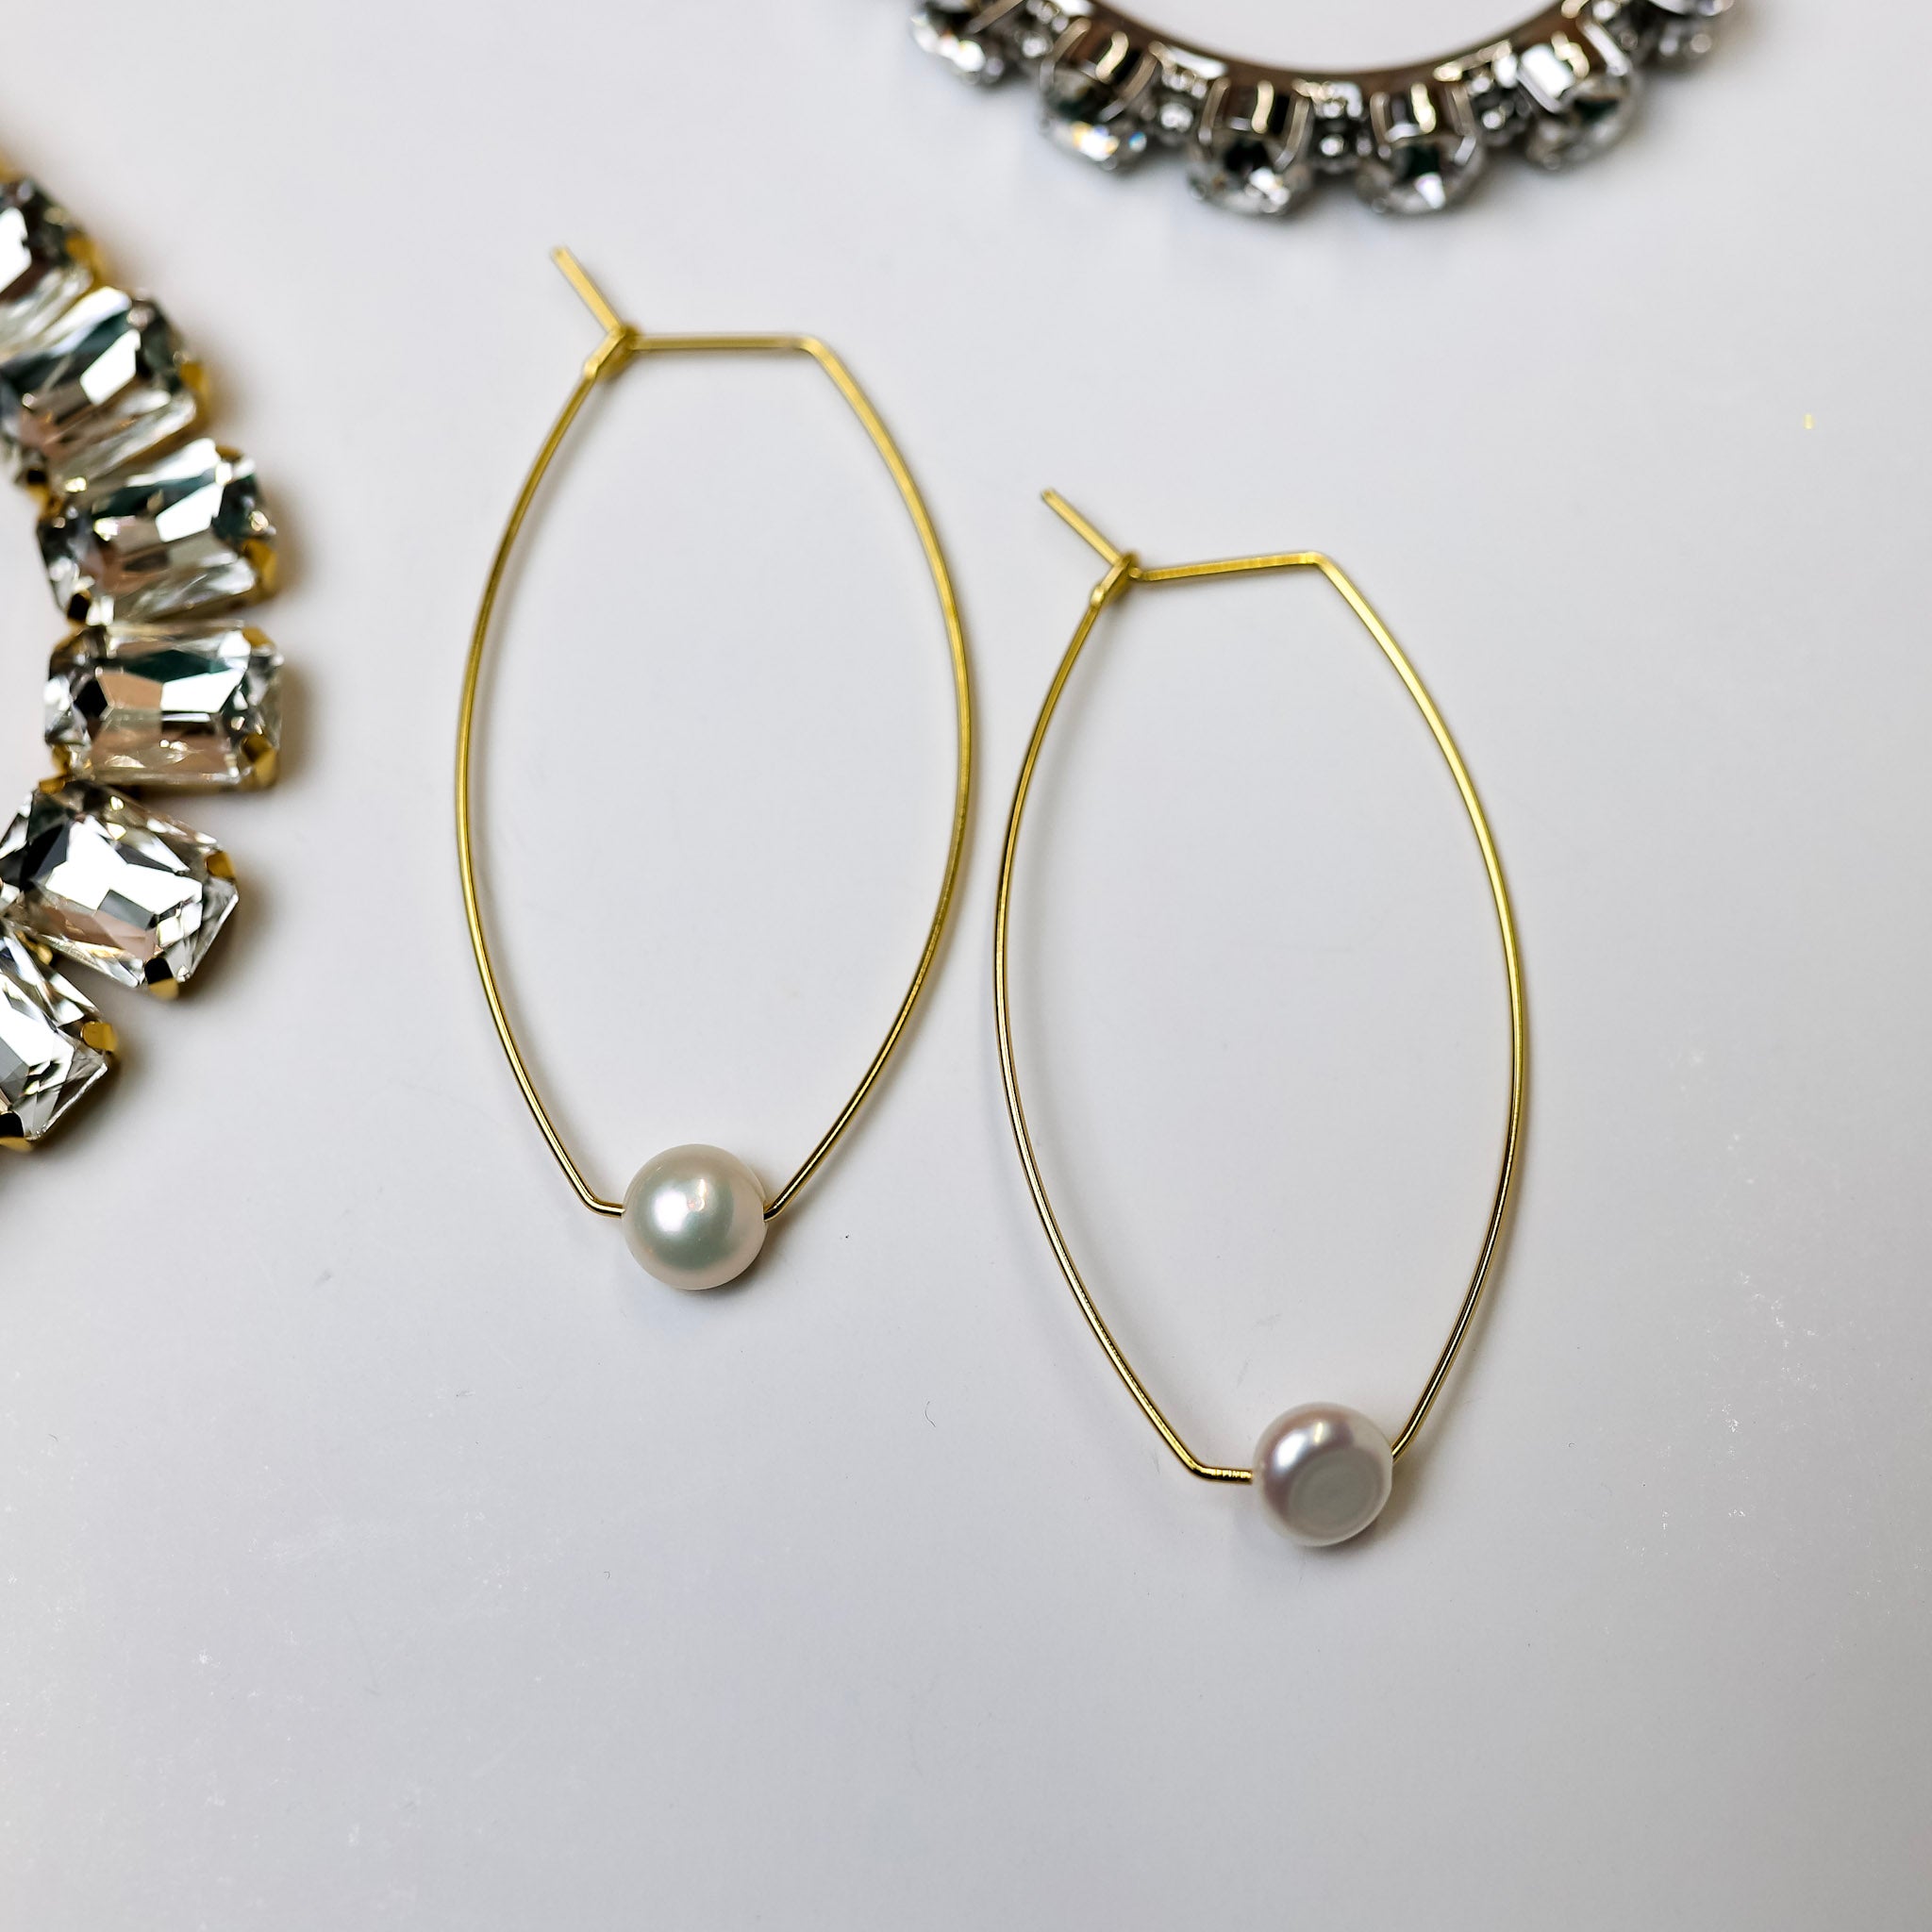 A pair of gold-tone cat eye hoop earrings with a pearl pendant at the bottom of each. Pictured on a white background with crystal necklaces.